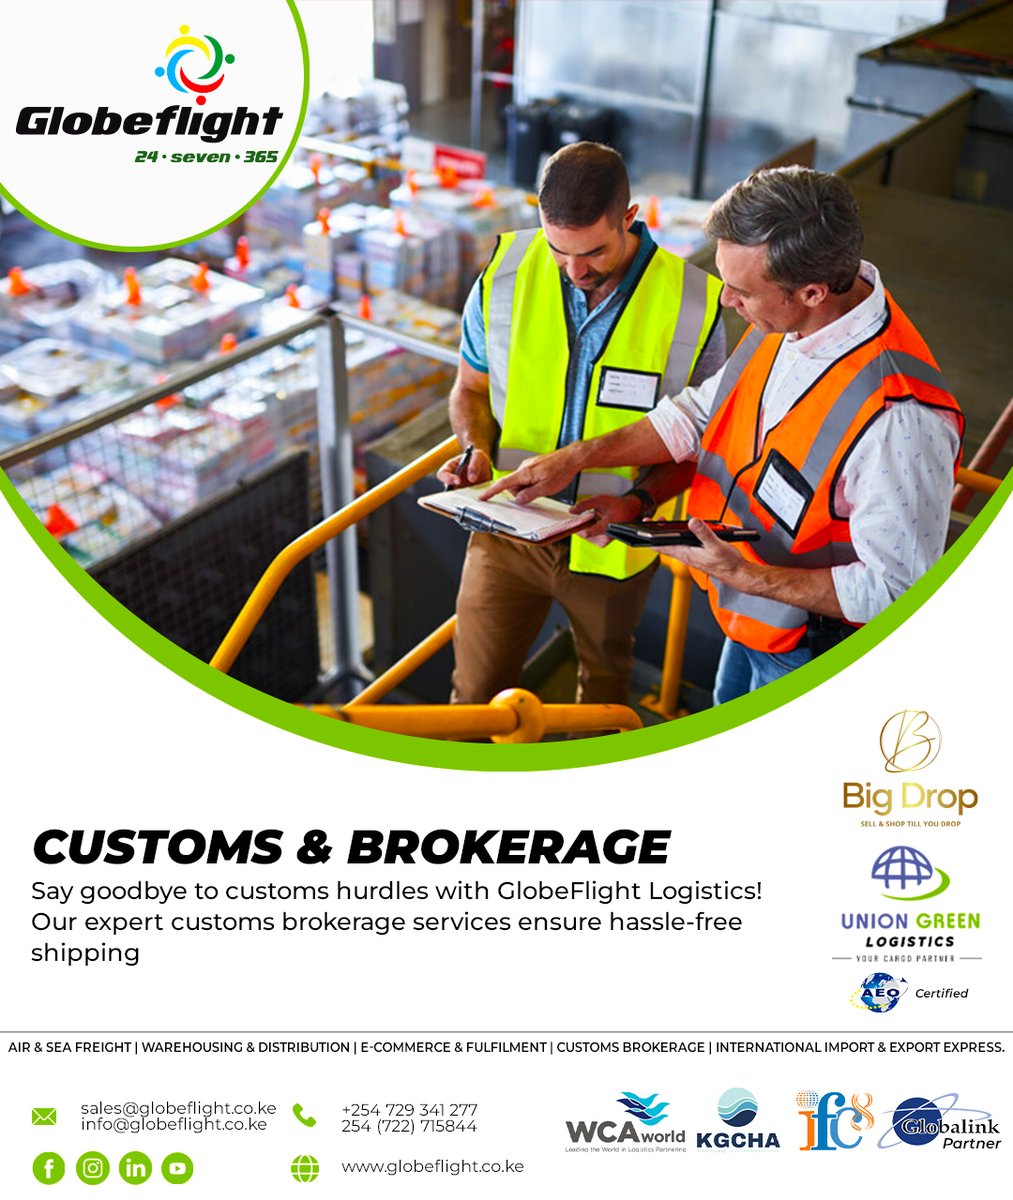 Simplify customs brokerage with GlobeFlight Logistics! Our experienced team ensures hassle-free clearance, saving you time and resources. Trust us for smooth import and export operations. 🌍📦✨ #GlobeFlightLogistics #CustomsBrokerage #EfficientClearance